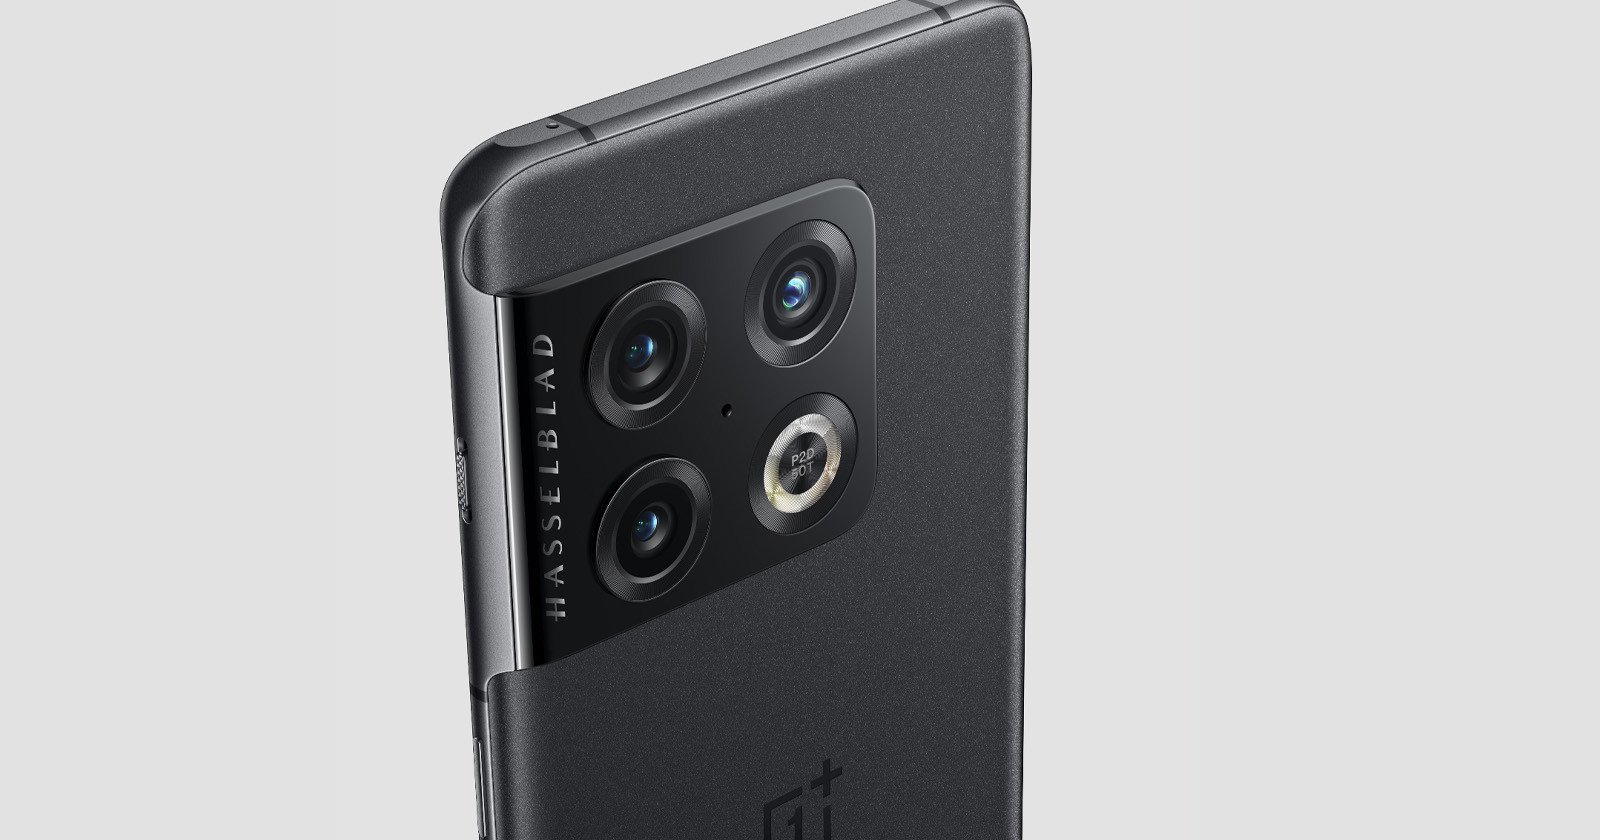  oneplus pro 2nd-gen hasselblad camera launches 